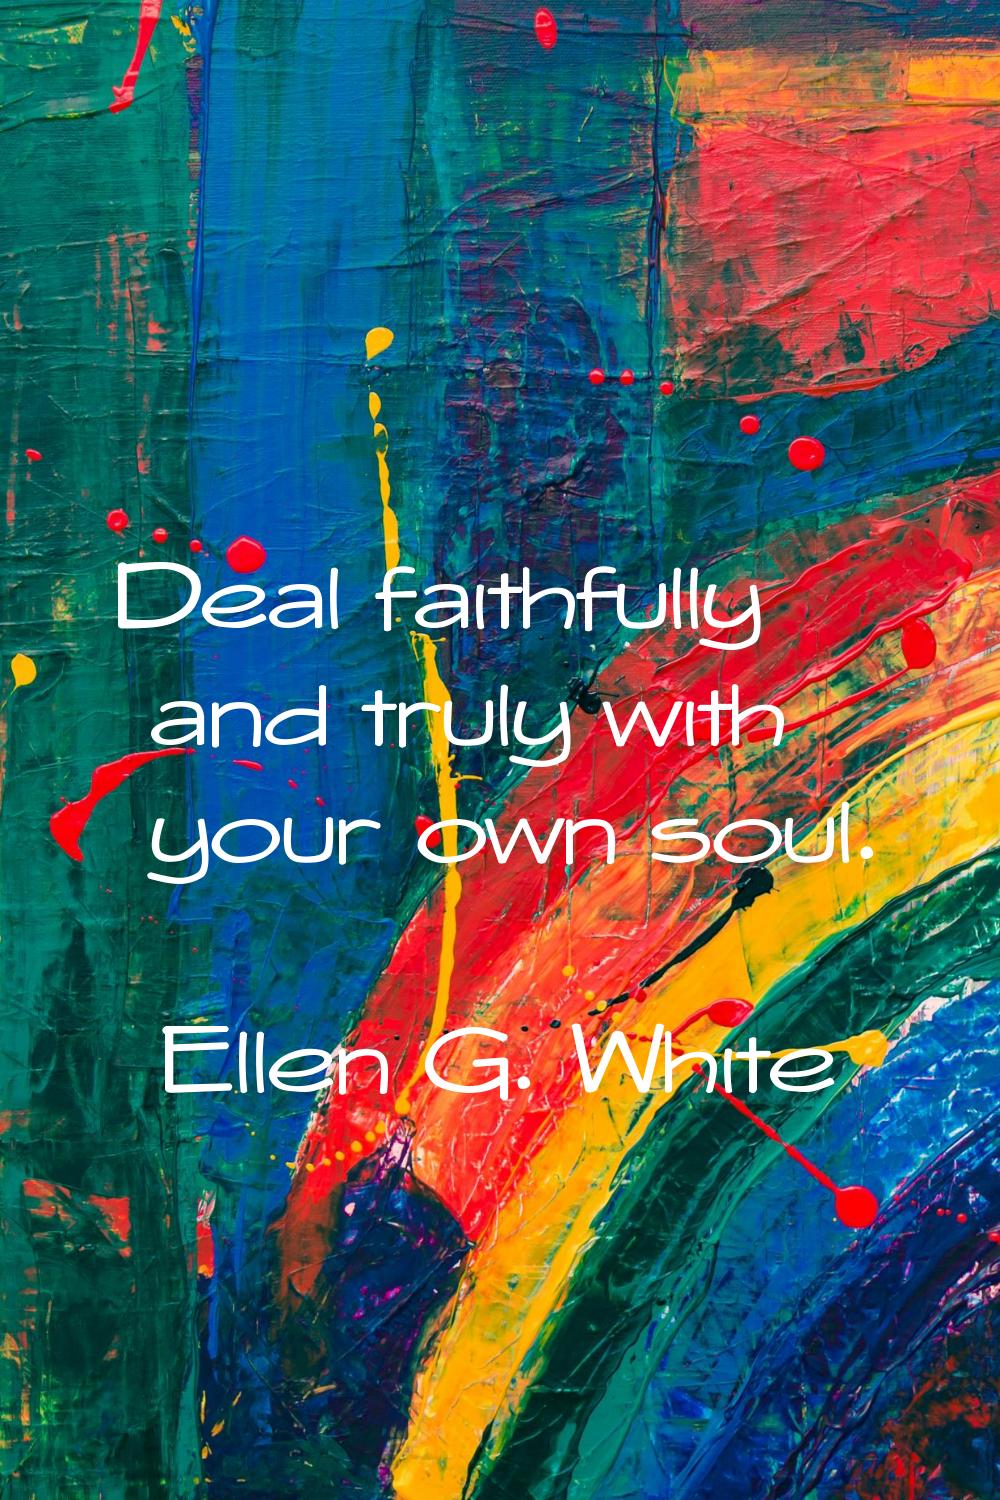 Deal faithfully and truly with your own soul.